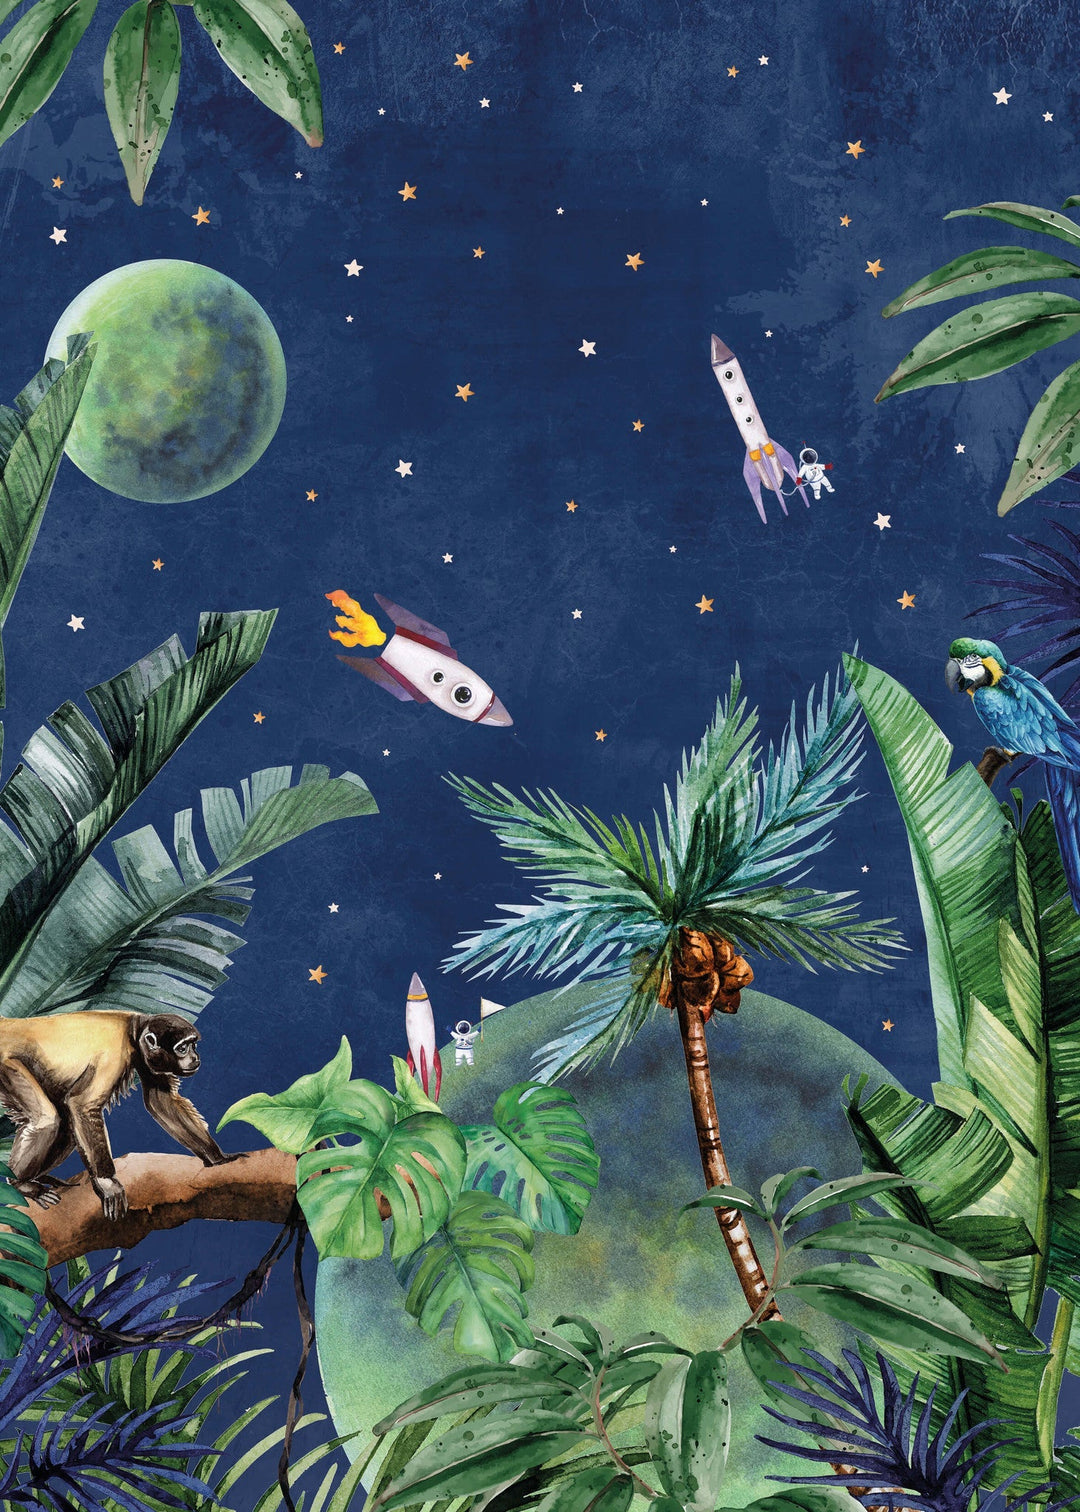 From Jungle To Space Wallpaper Mural